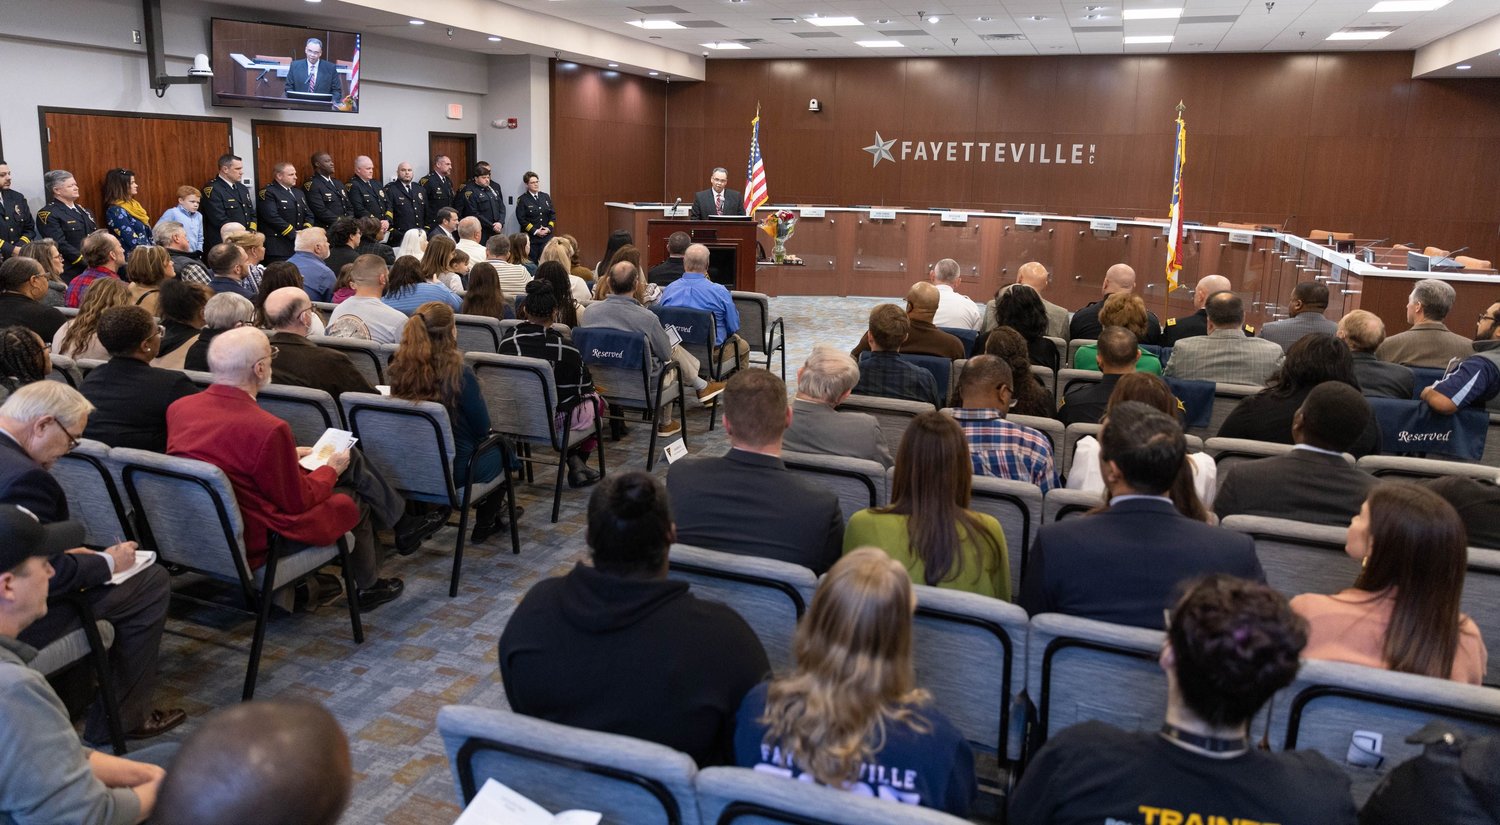 About 150 people attended the swearing-in of Fayetteville's new police chief, Kimberle Braden, on Friday at City Hall.